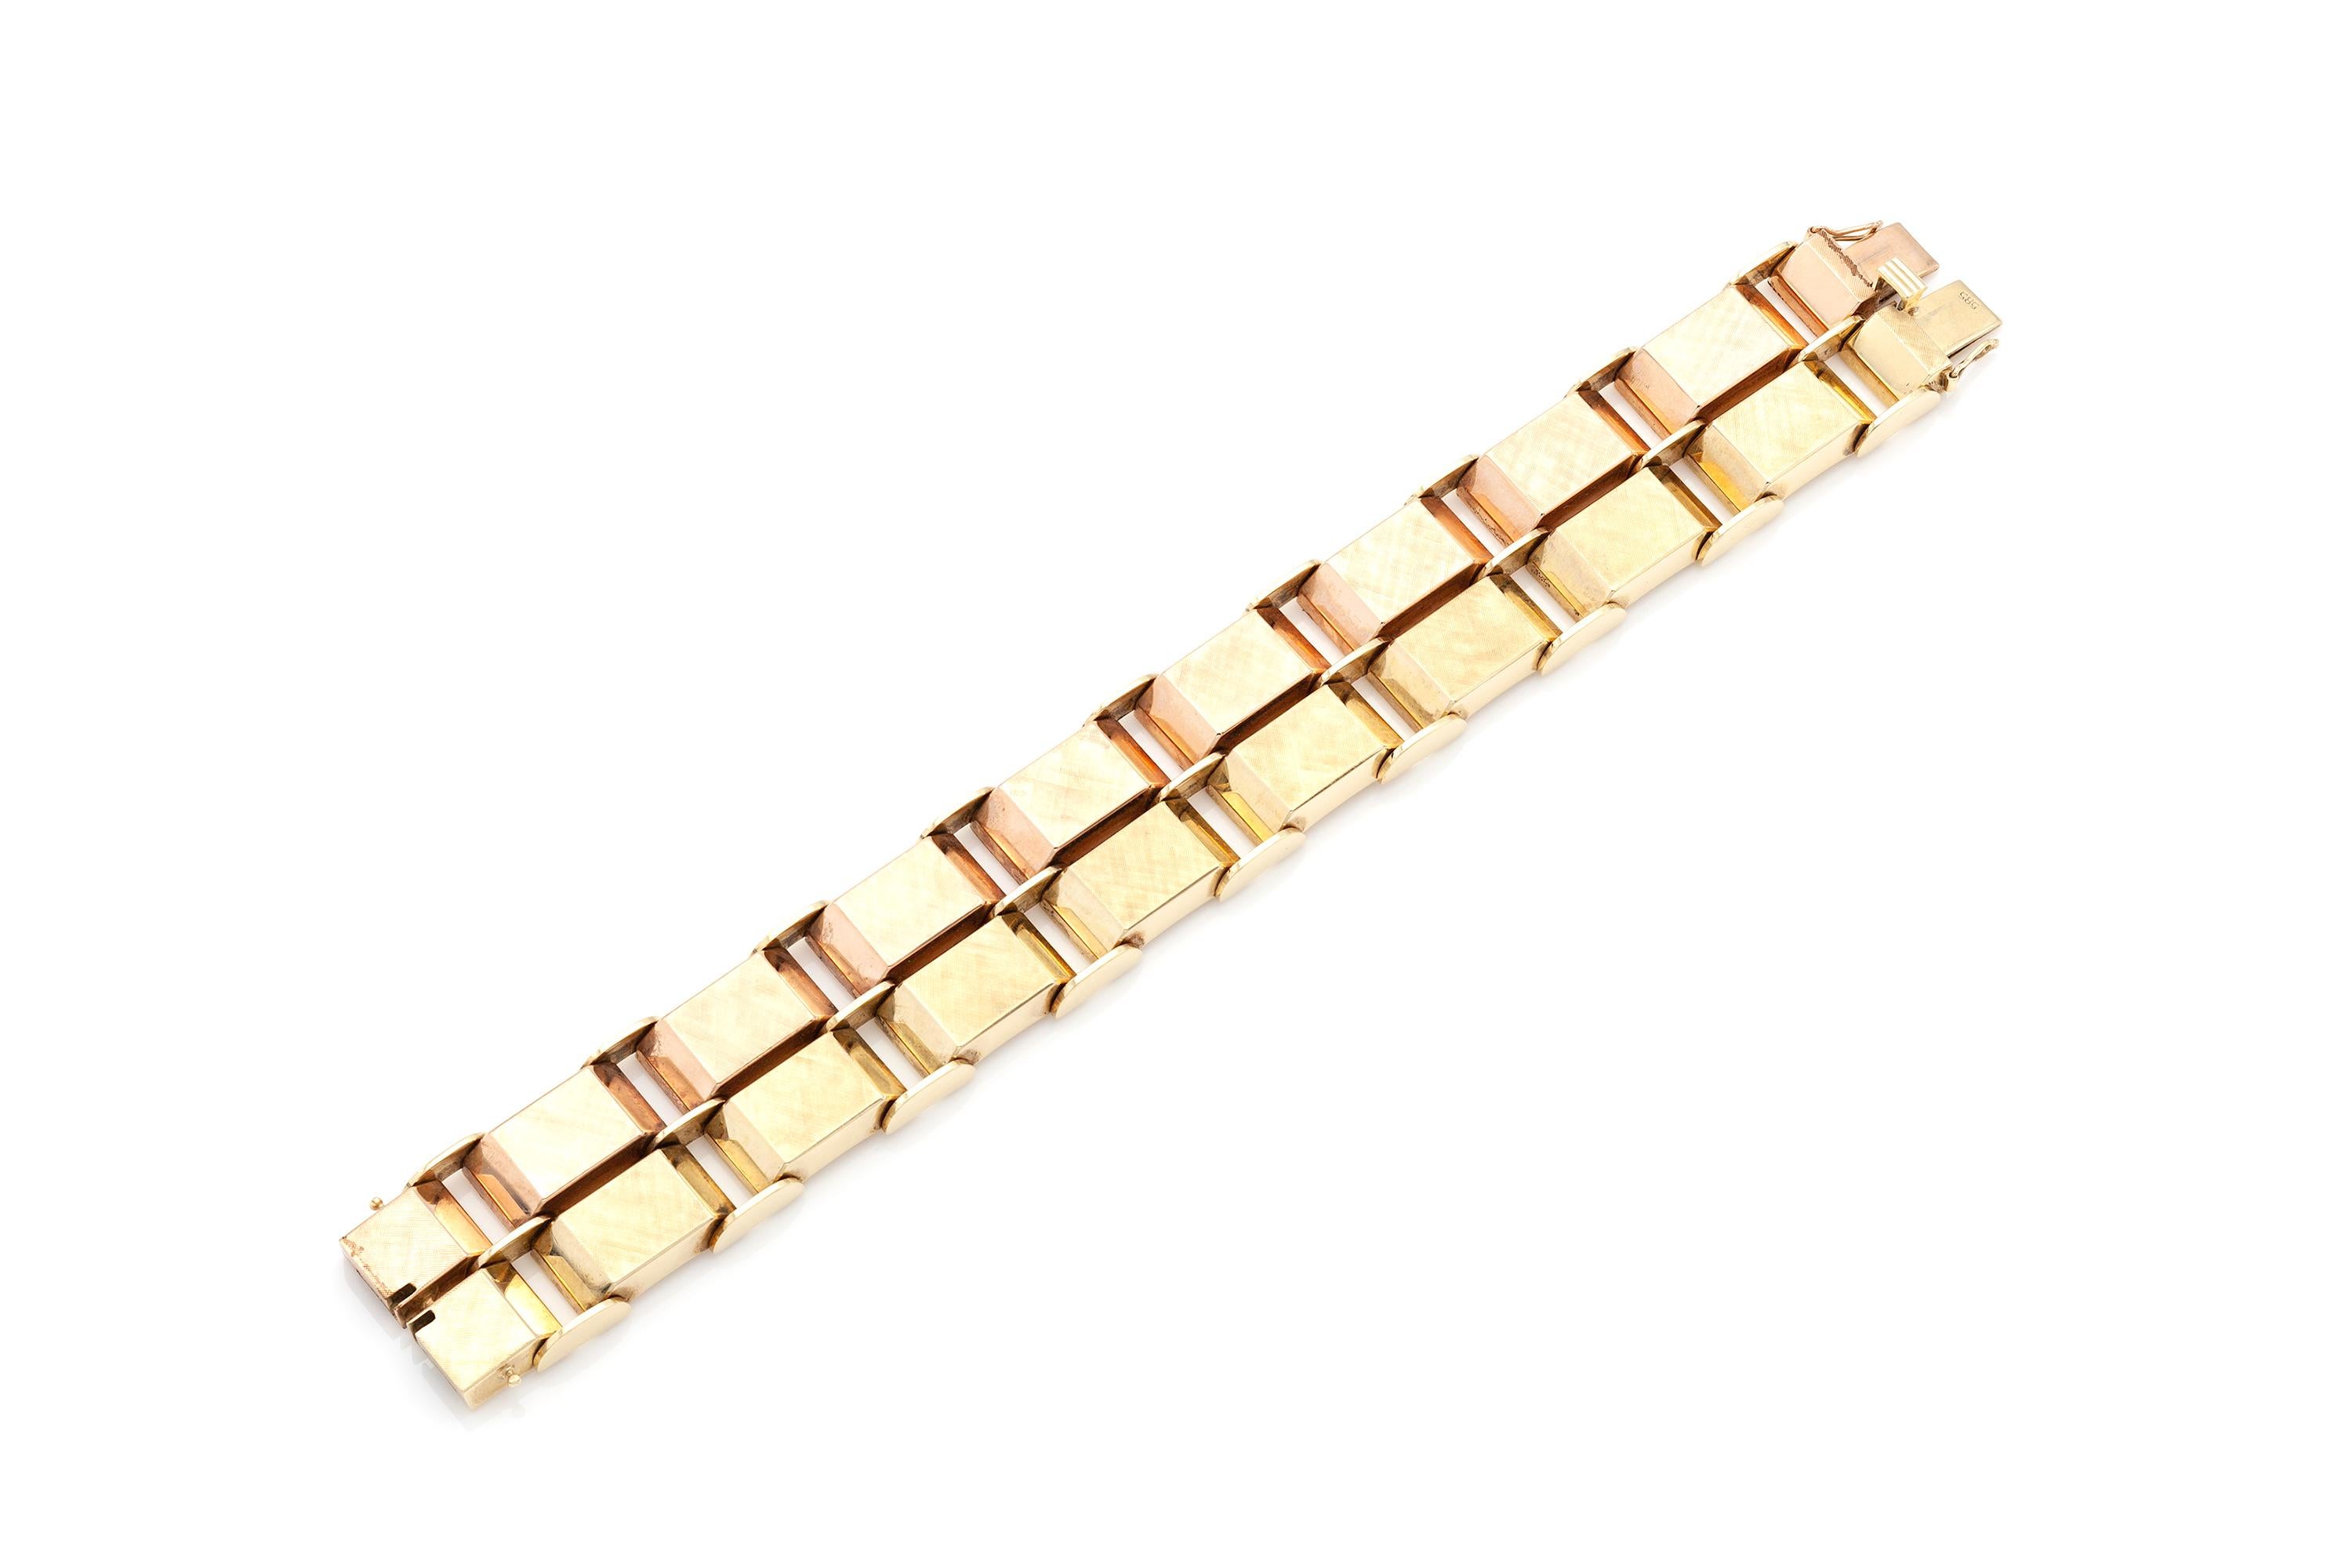 Finely crafted in 14K yellow and rose gold.
Size 7 1/2 inches. 